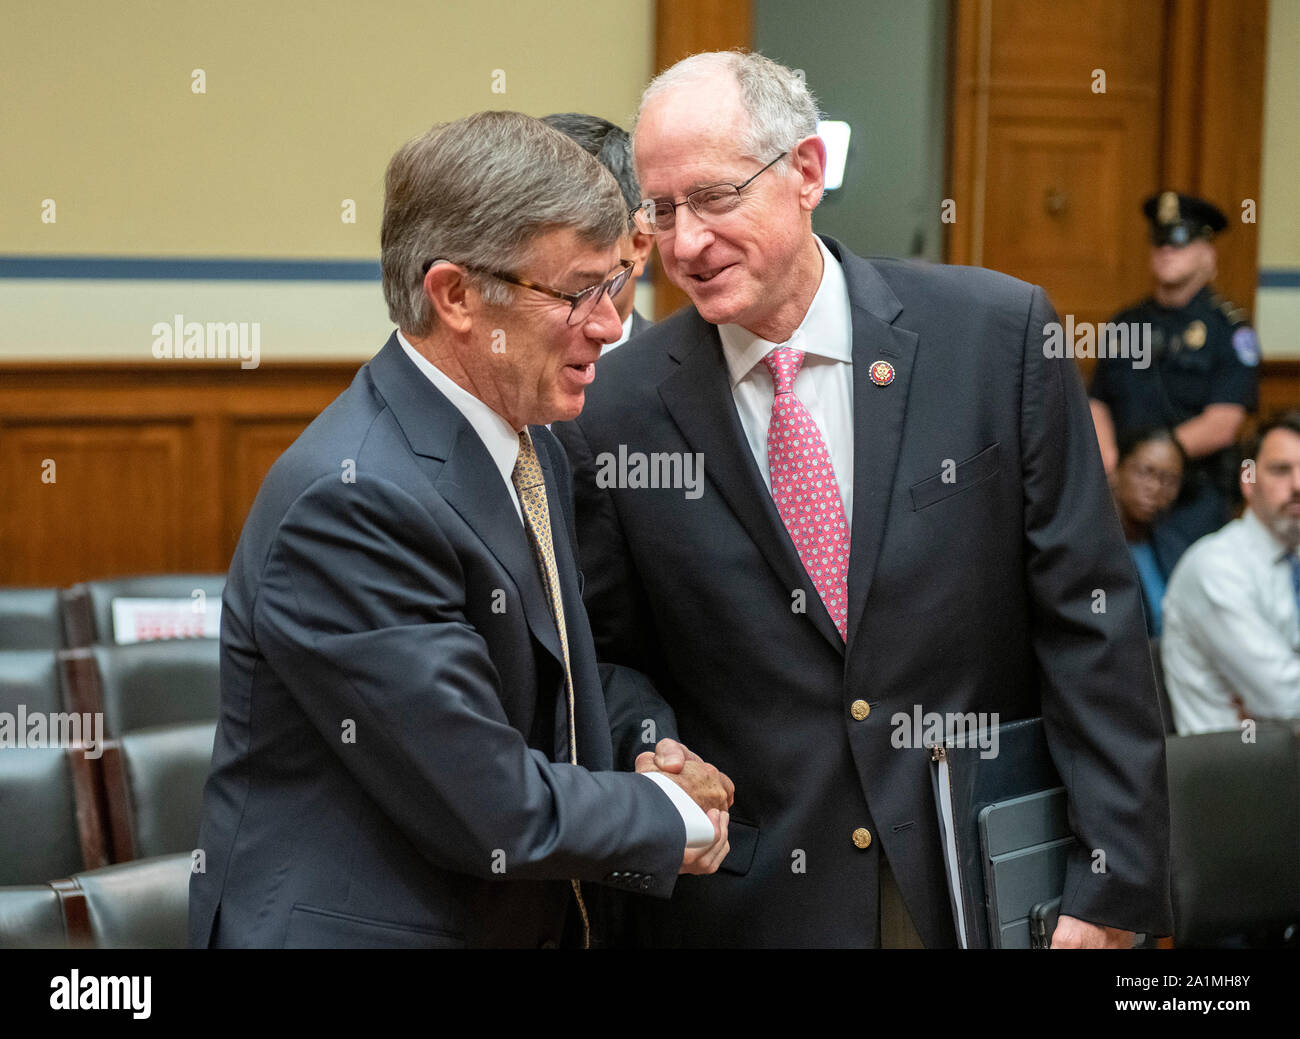 Vice Admiral Joseph Maguire (US Navy retired), acting Director of National Intelligence, left, shakes hands with United States Representative Mike Conaway (Republican of Texas), right, following his testimony before the US House Permanent Select Committee on Intelligence on the Whistleblower Complaint on Capitol Hill in Washington, DC on Thursday, September 26, 2019.Credit: Ron Sachs/CNP (RESTRICTION: NO New York or New Jersey Newspapers or newspapers within a 75 mile radius of New York City) | usage worldwide Stock Photo